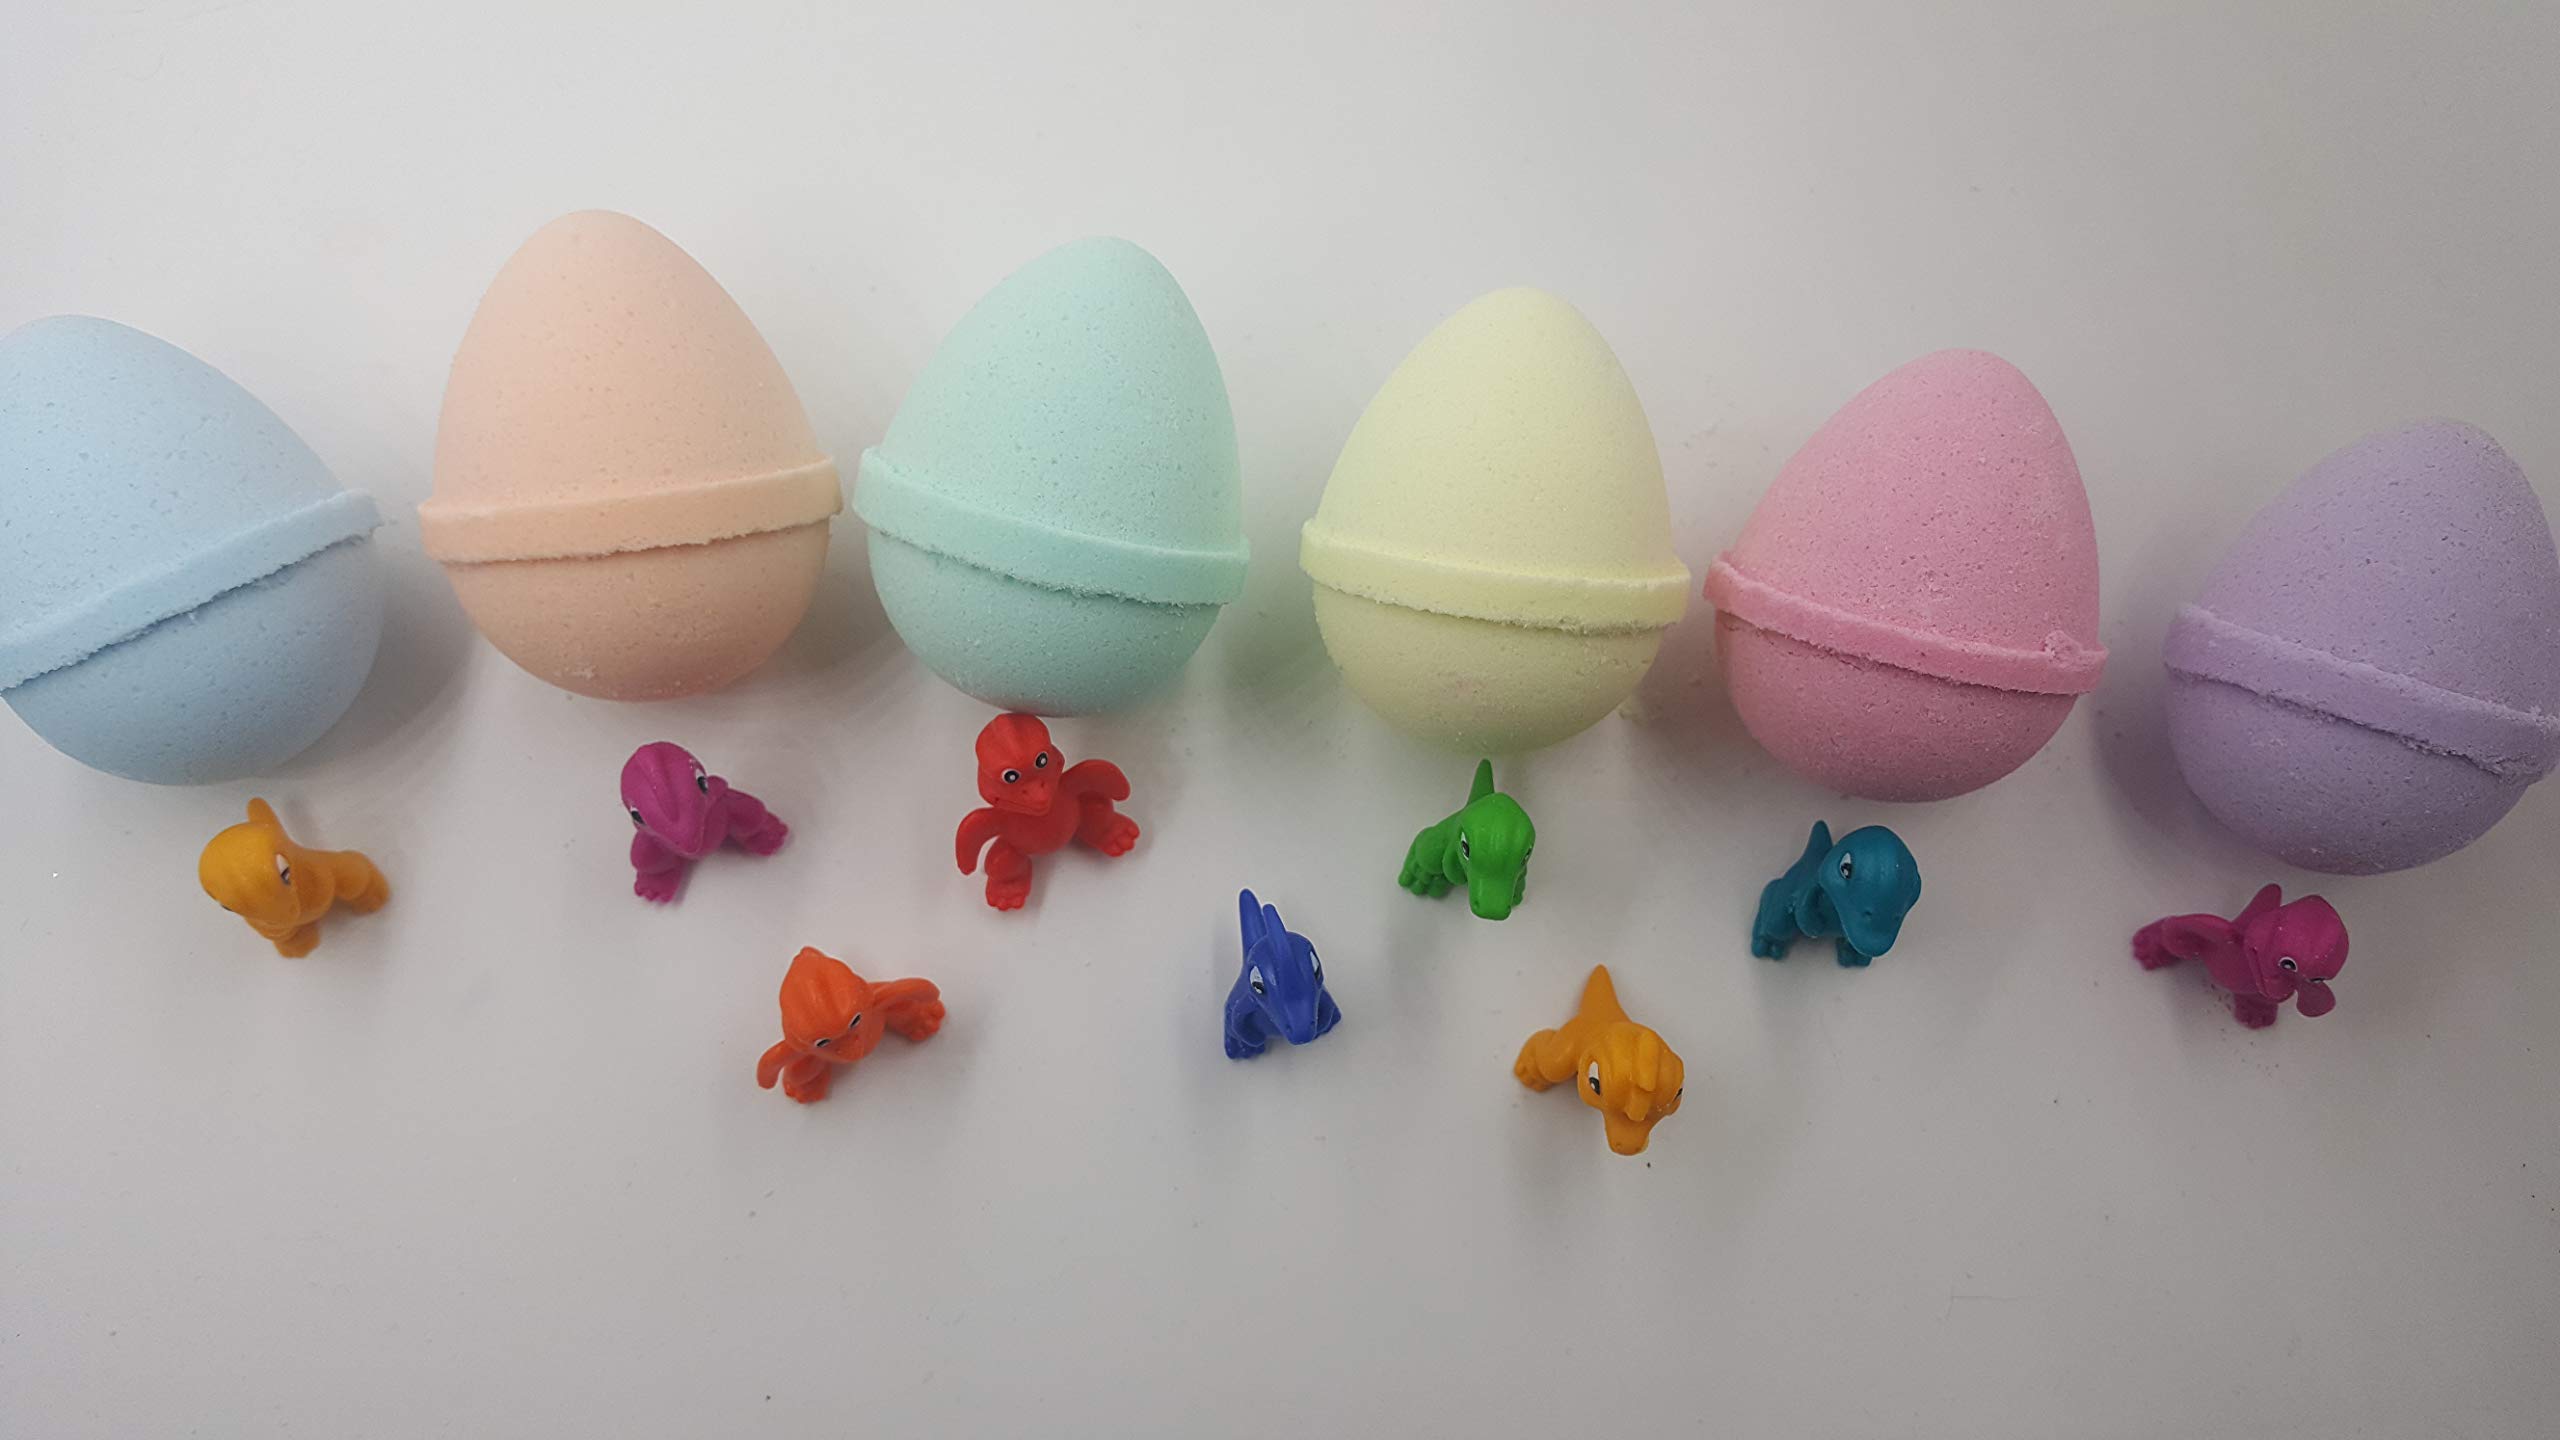 SPA PURE LITTLE DINOS BOMBS: 6 EGG-SHAPED bath bombs for kids with surprise LITTLE DINOS inside, USA Made, Handmade, Natural Bath Bombs, Birthday Gift idea for Kids, Spa Parties